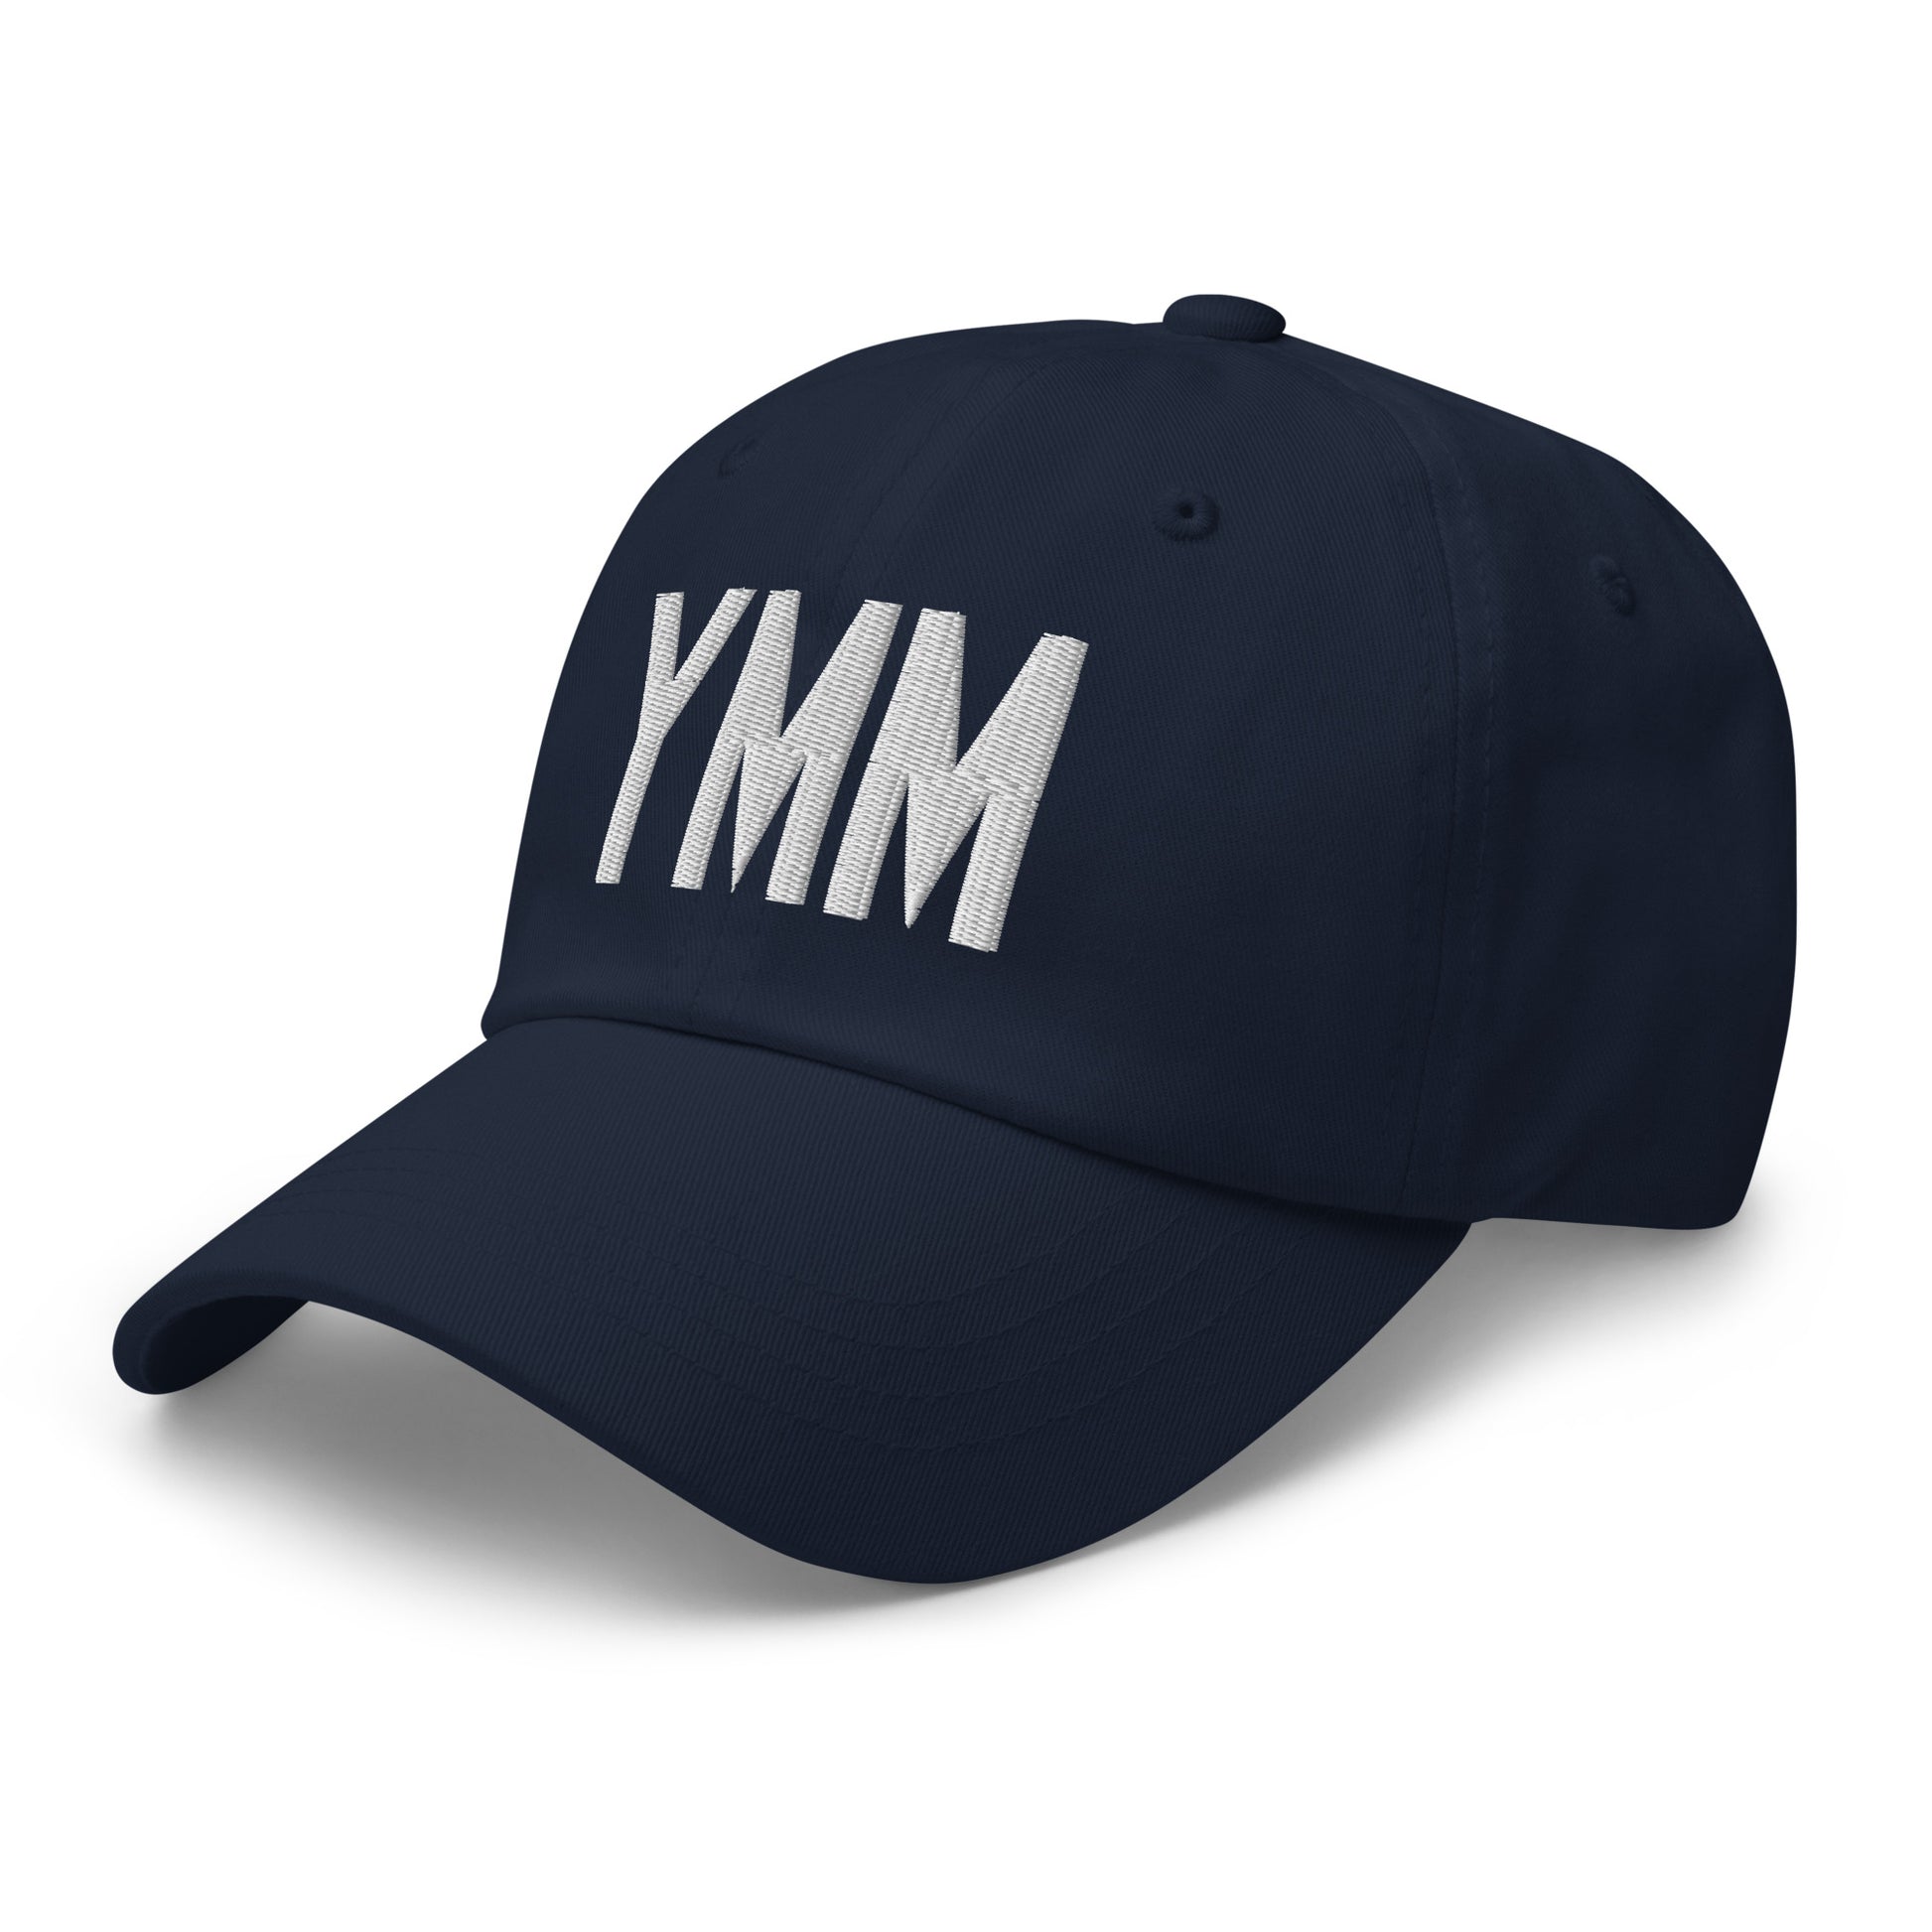 Airport Code Baseball Cap - White • YMM Fort McMurray • YHM Designs - Image 18